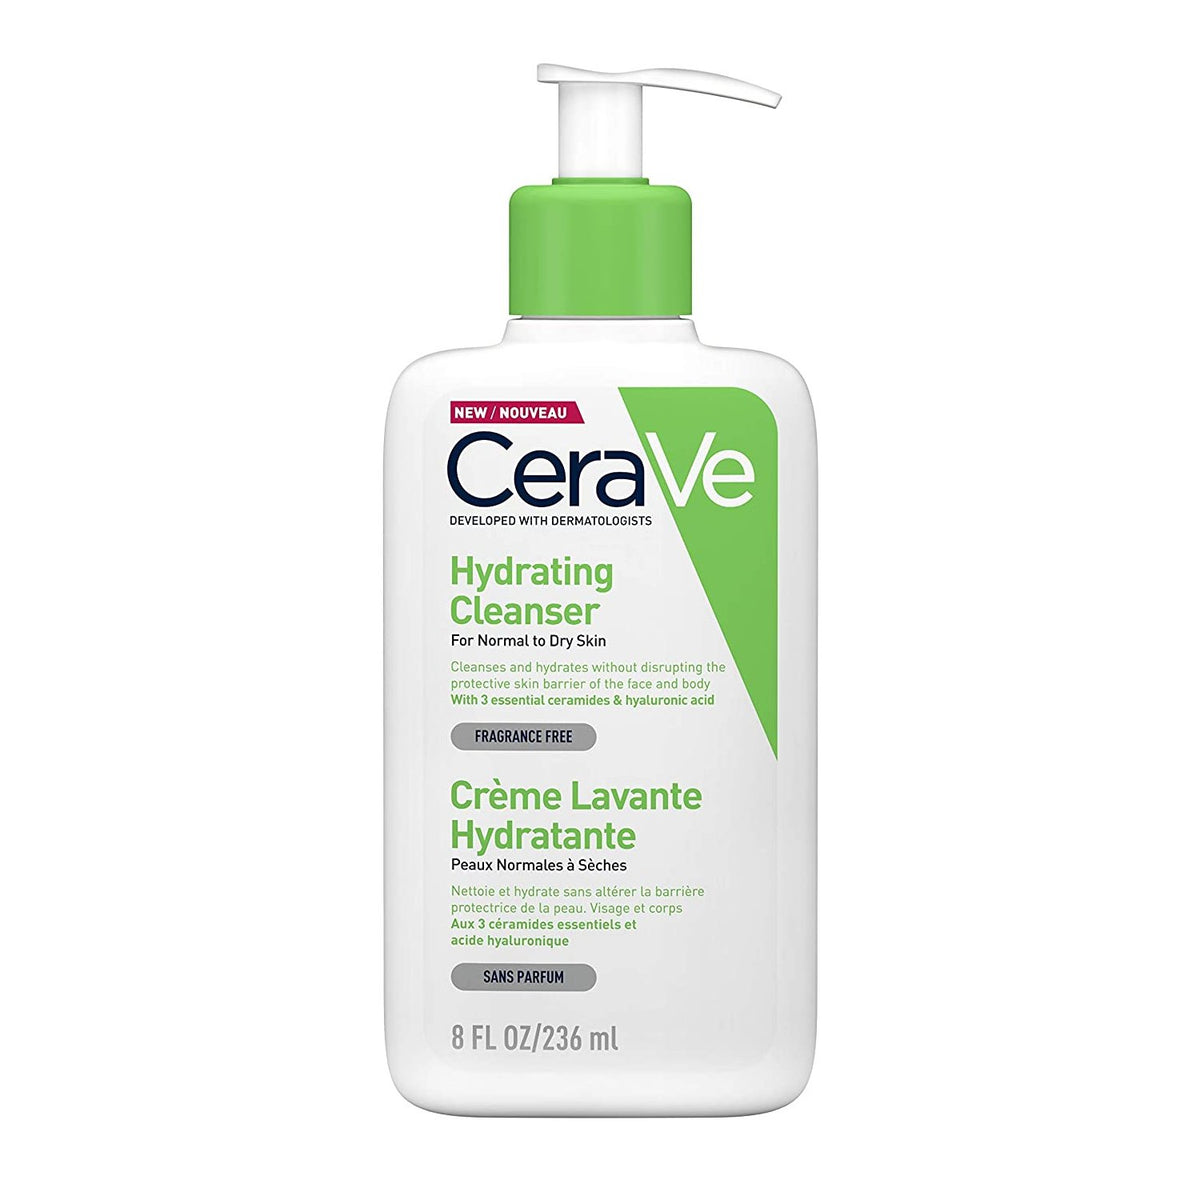 CeraVe Hydrating Cleanser for Normal to Dry Skin (8 FL OZ/236 ml) CeraVe